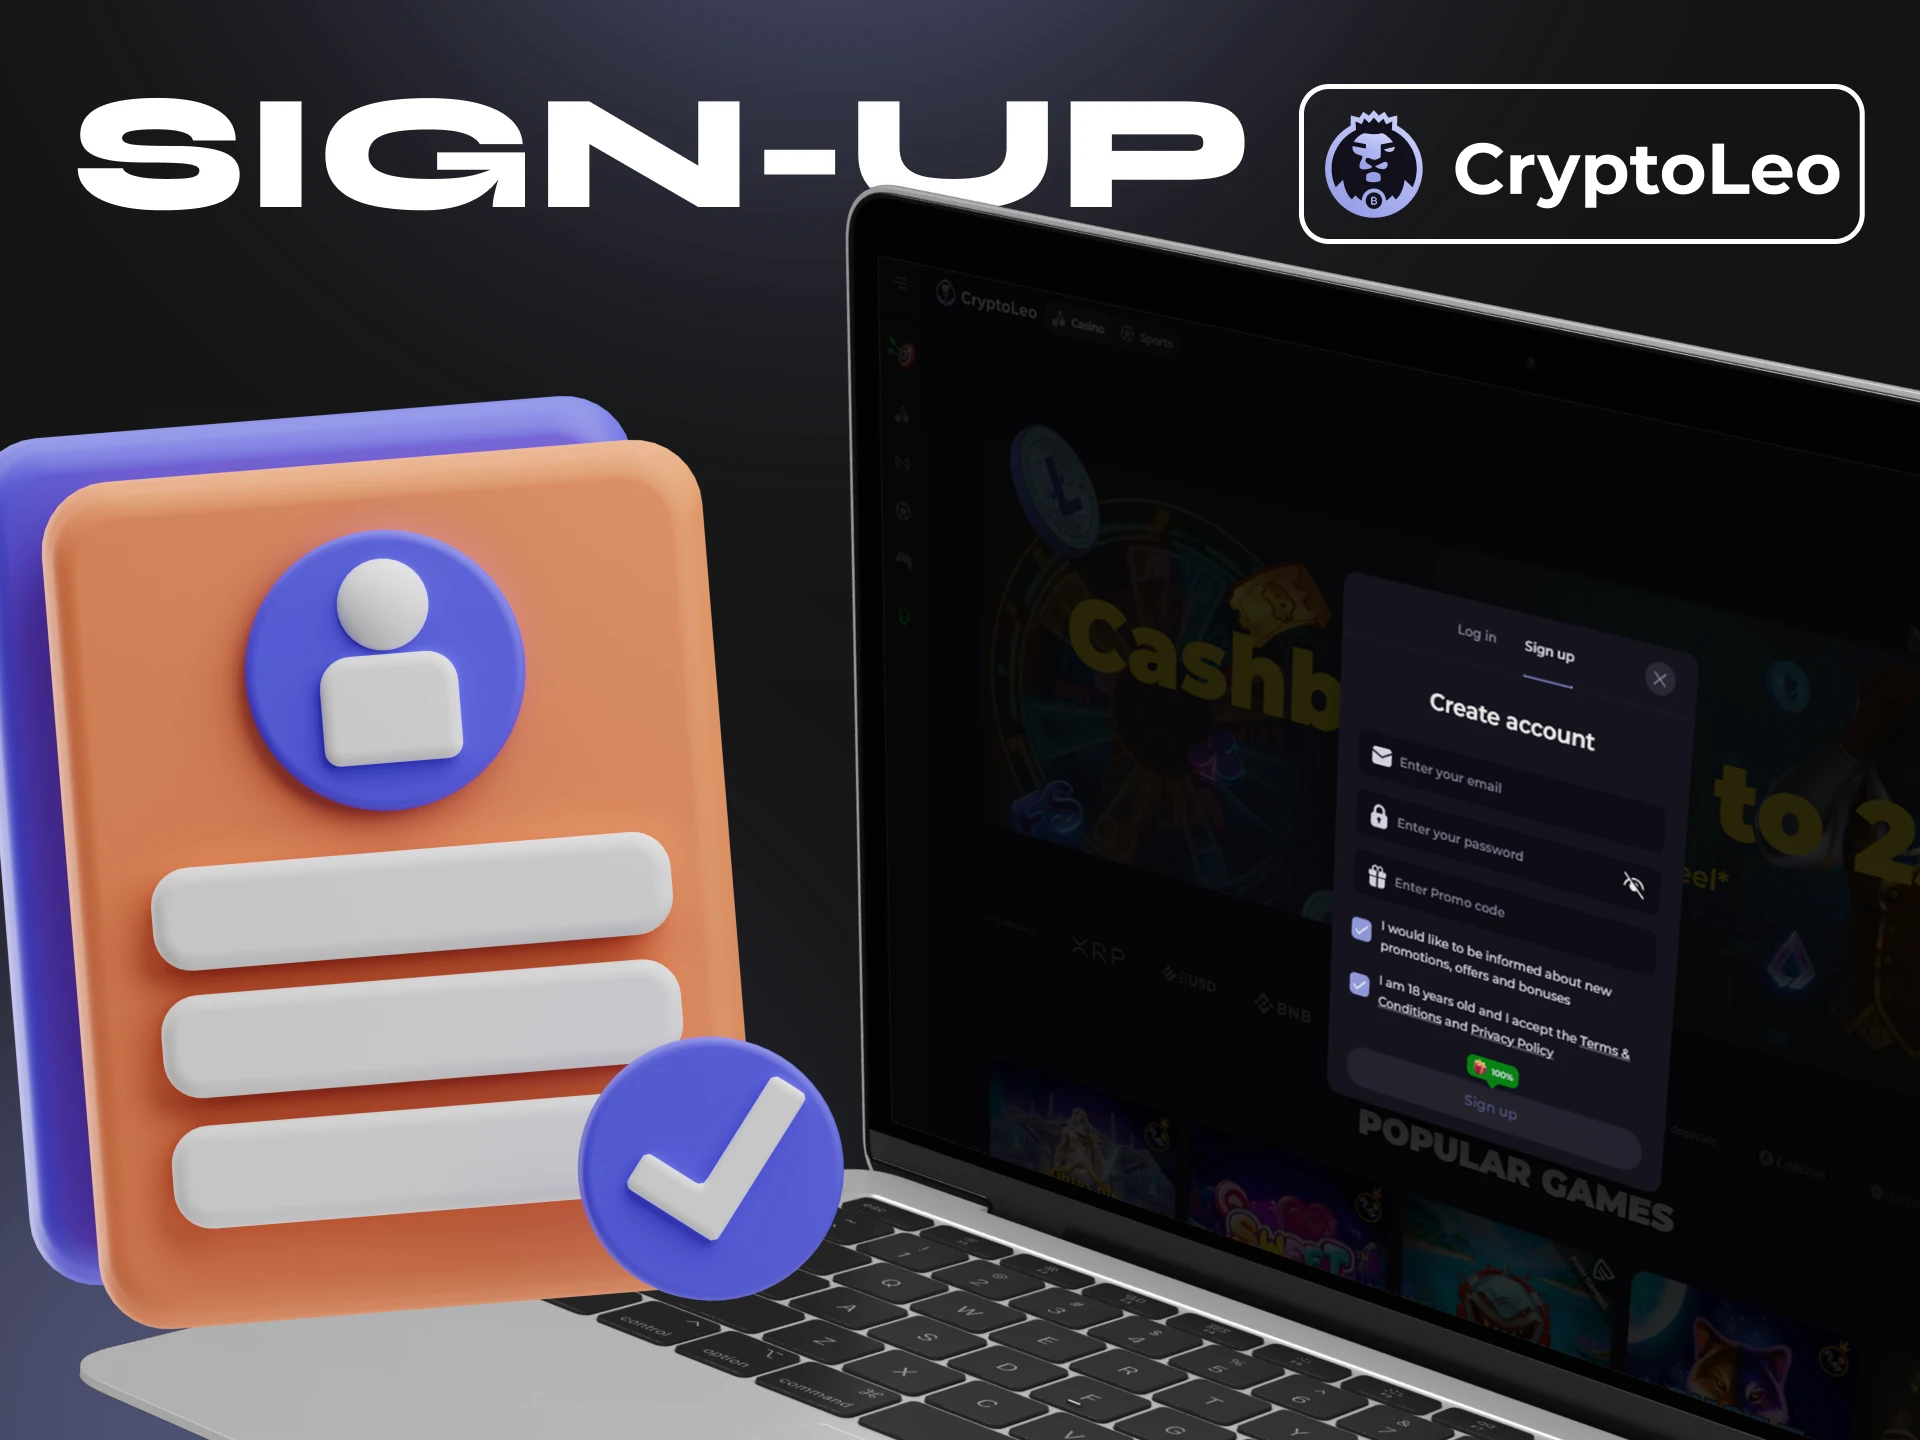 Registration at Cryptoleo casino takes a little time.